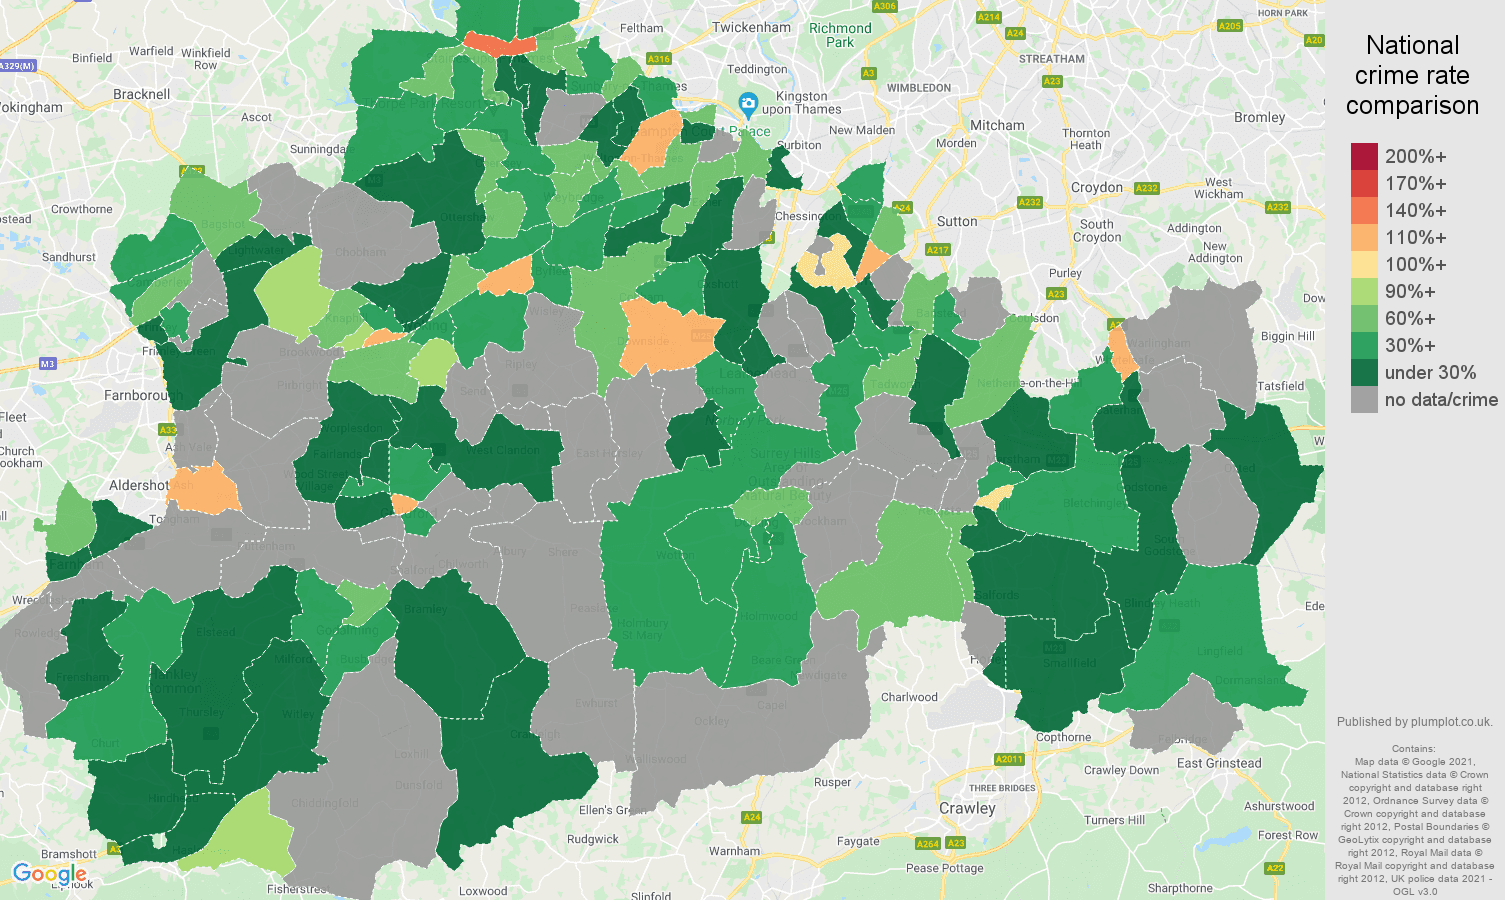 Surrey robbery crime rate comparison map